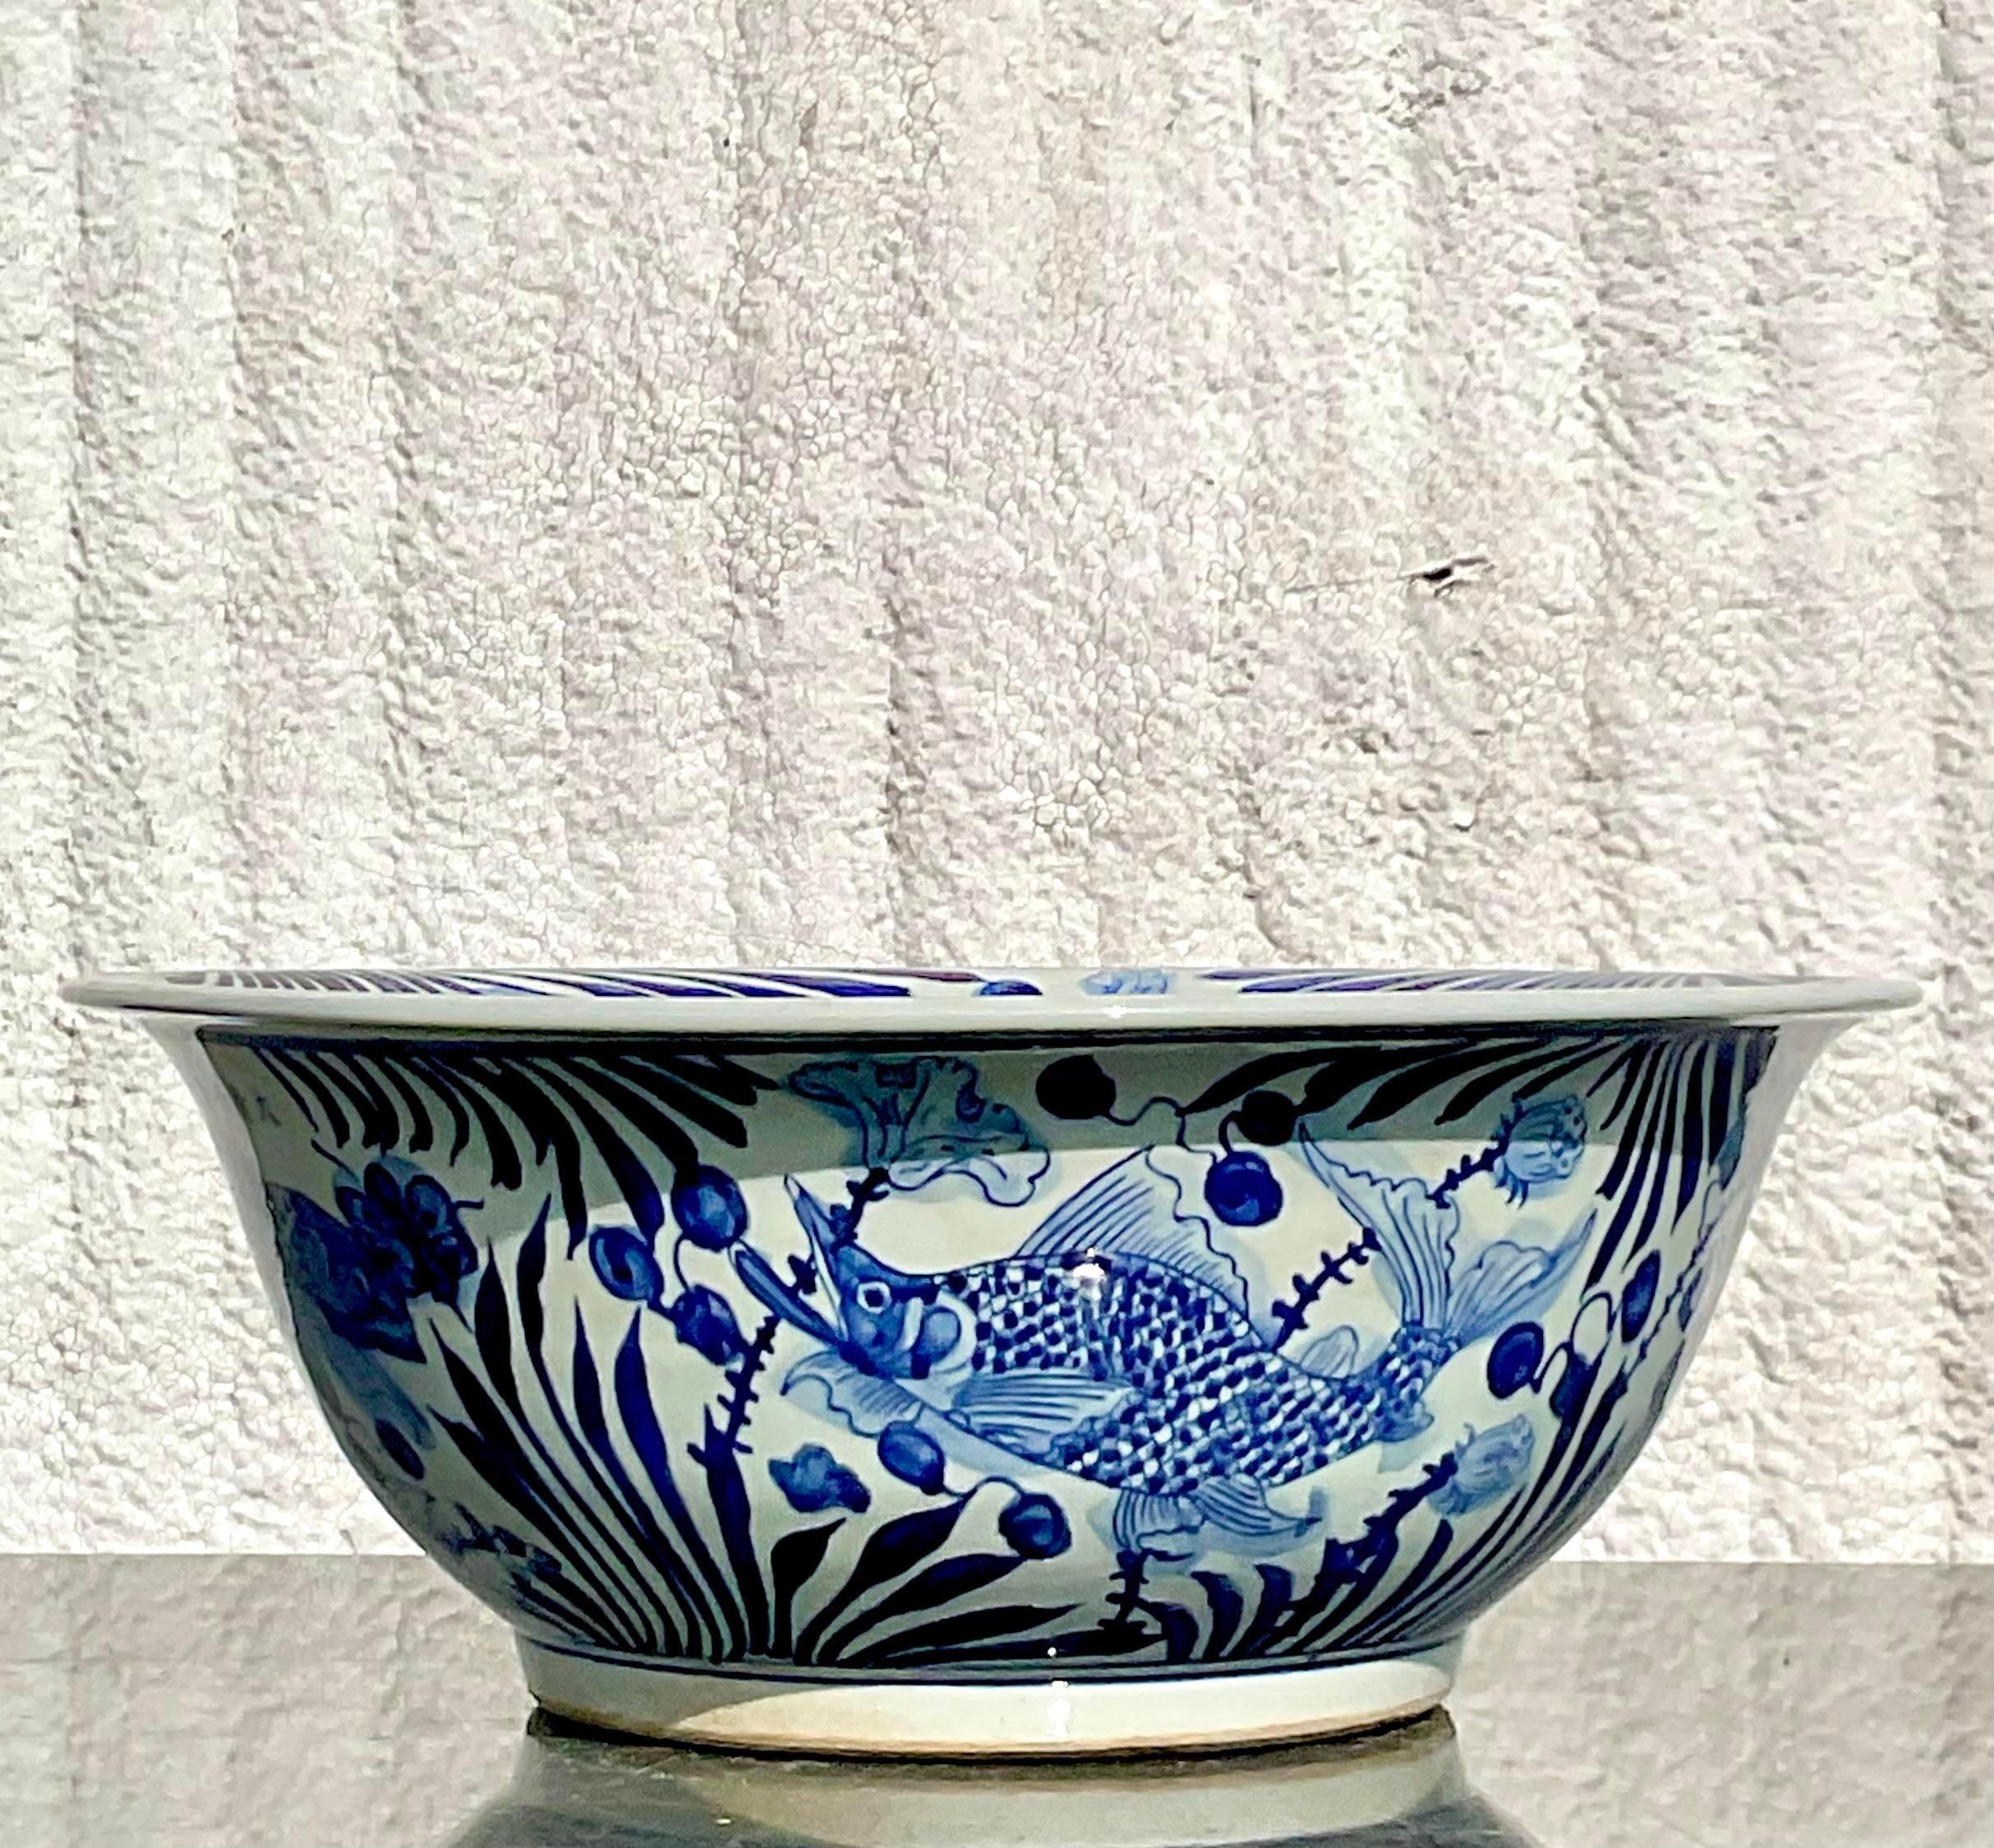 A fabulous vintage Asian centerpiece bowl. A chic fish design in a classic blue and white story. A chic glazed ceramic finish. Perfect alone or fill it it with shells or orchids. You decide! Monumental in size and drama. Acquired from a Palm Beach